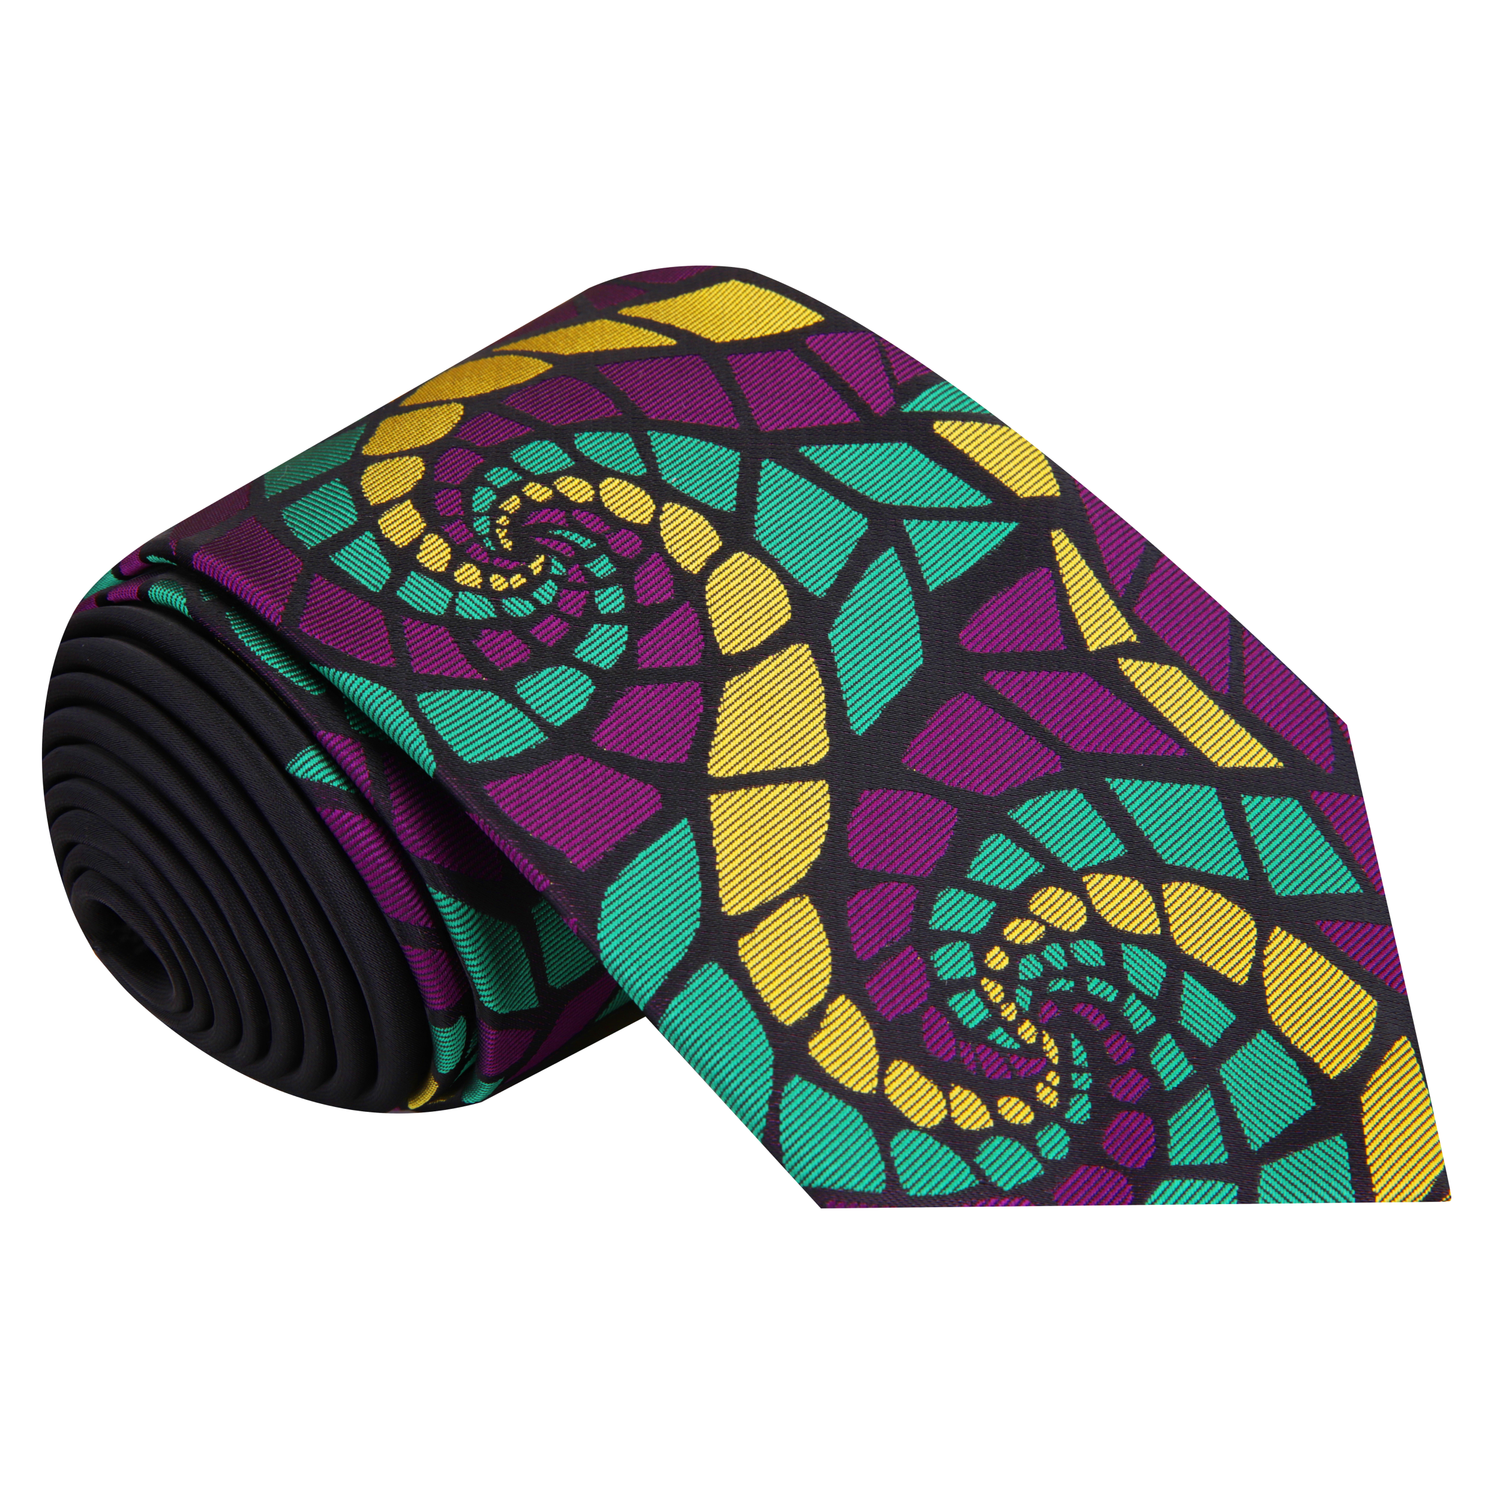 A Purple, Green, Gold Abstract Swirl Tie